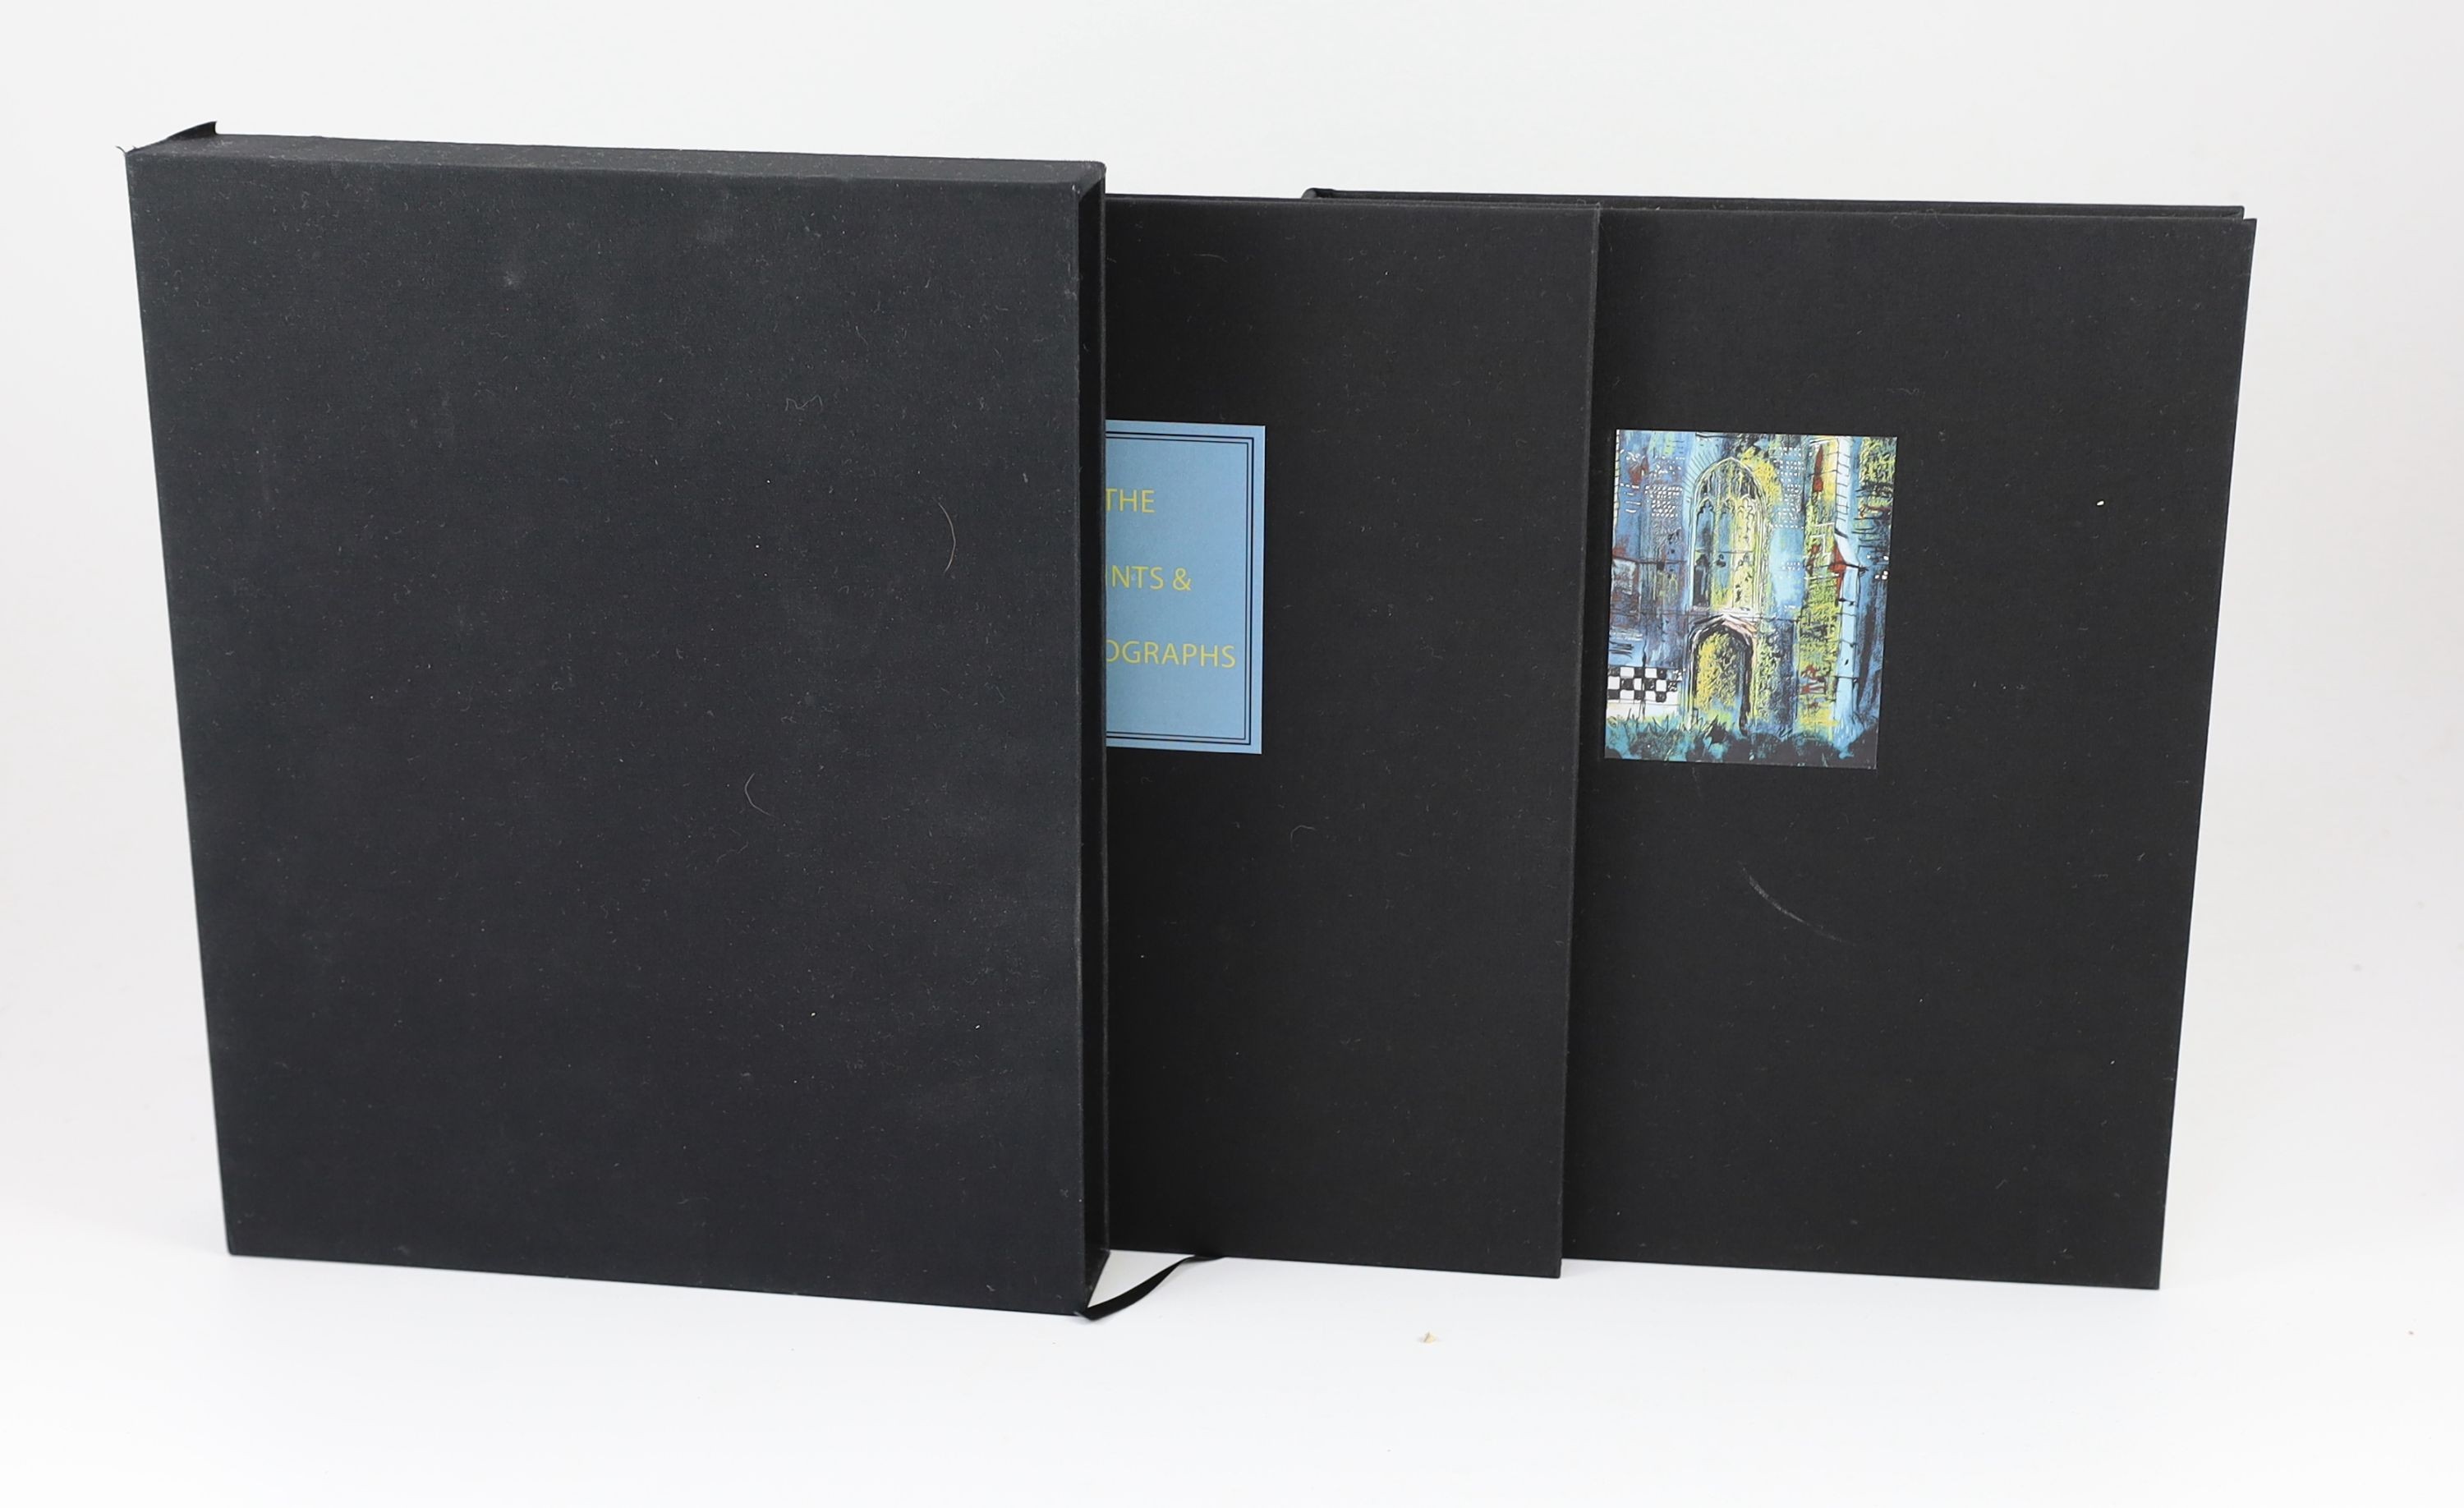 Levinson, Orde - The Prints of John Piper: Quality and Experiment. A Catalogue Raisonne 1923-91. Revised and Expanded Edition, one of 100, 4to, black cloth, together with 2 signed photographs of the author and 3 limited